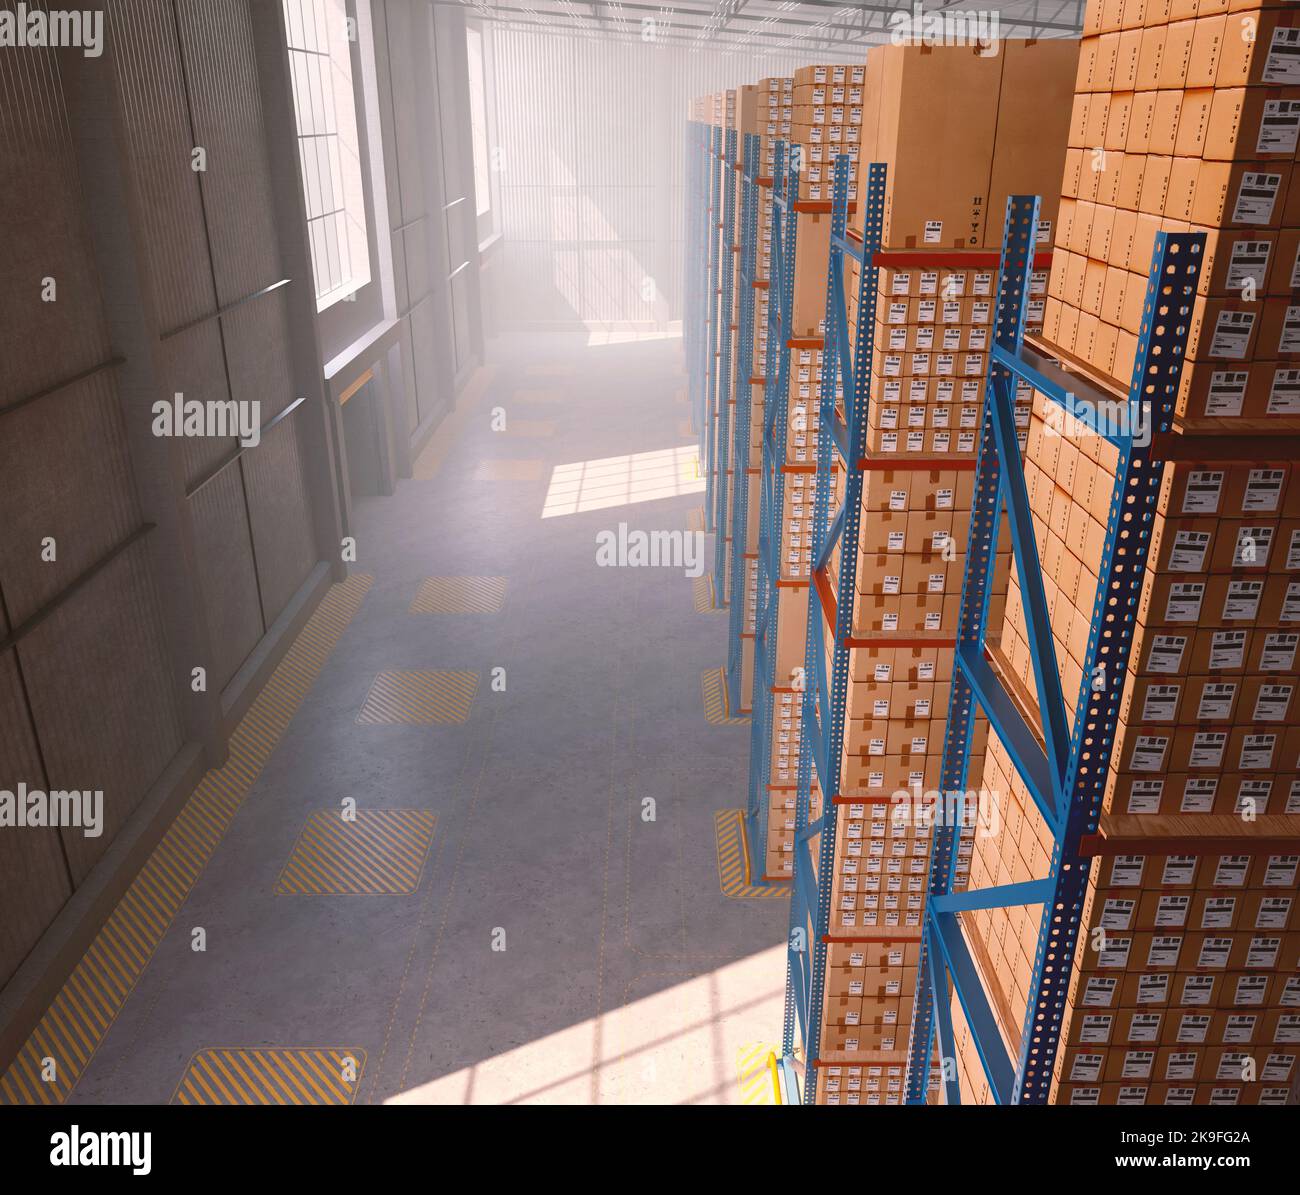 Interior of an empty modern logistic warehouse storage facility with packed shelving in the daytime - 3D render Stock Photo